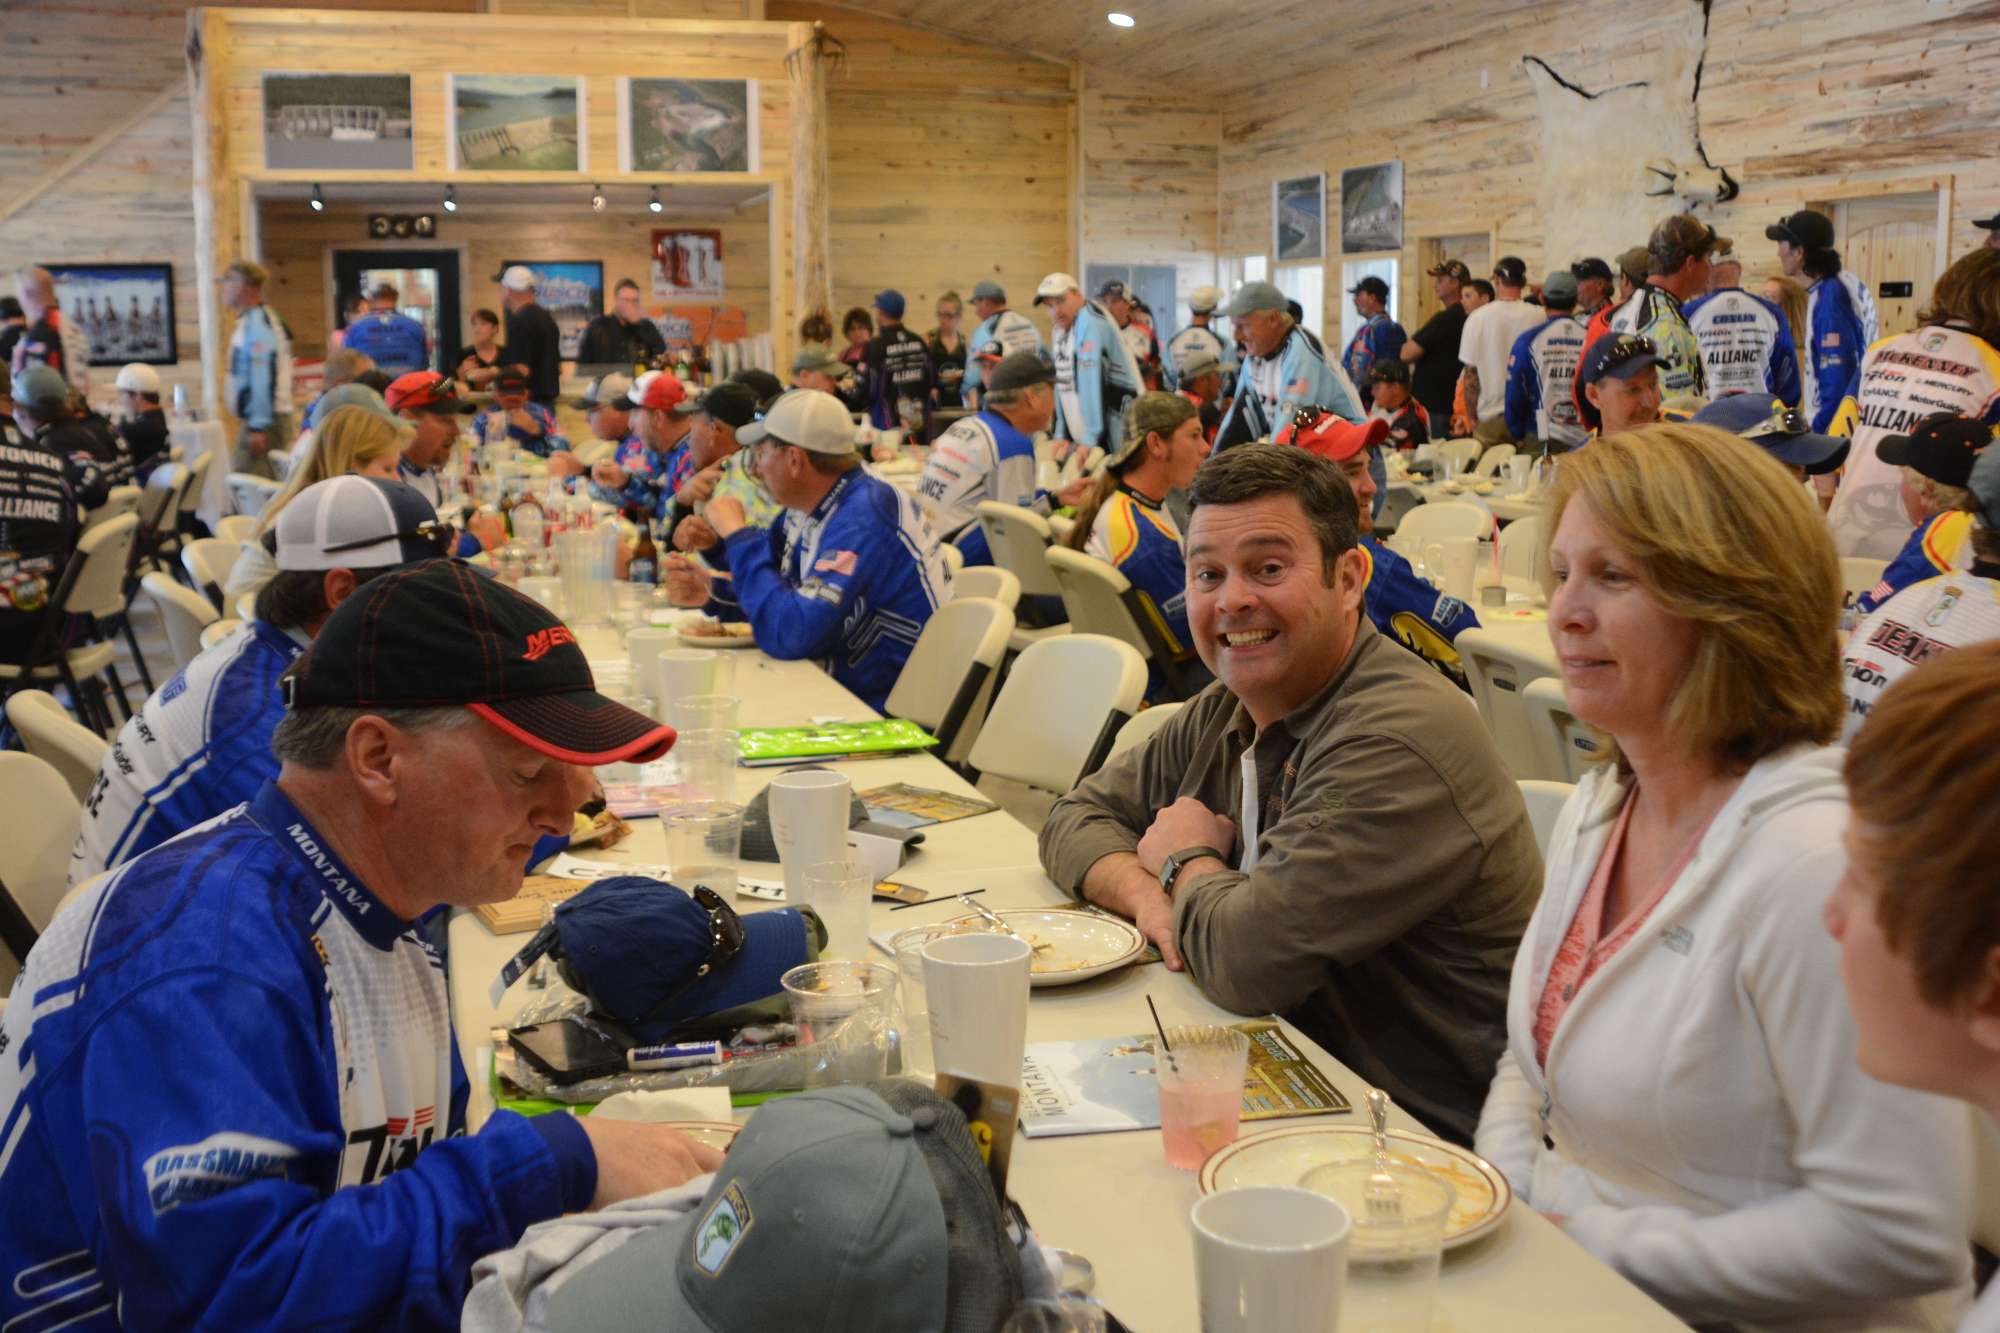 With the business behind them, anglers enjoy a barbecue dinner.